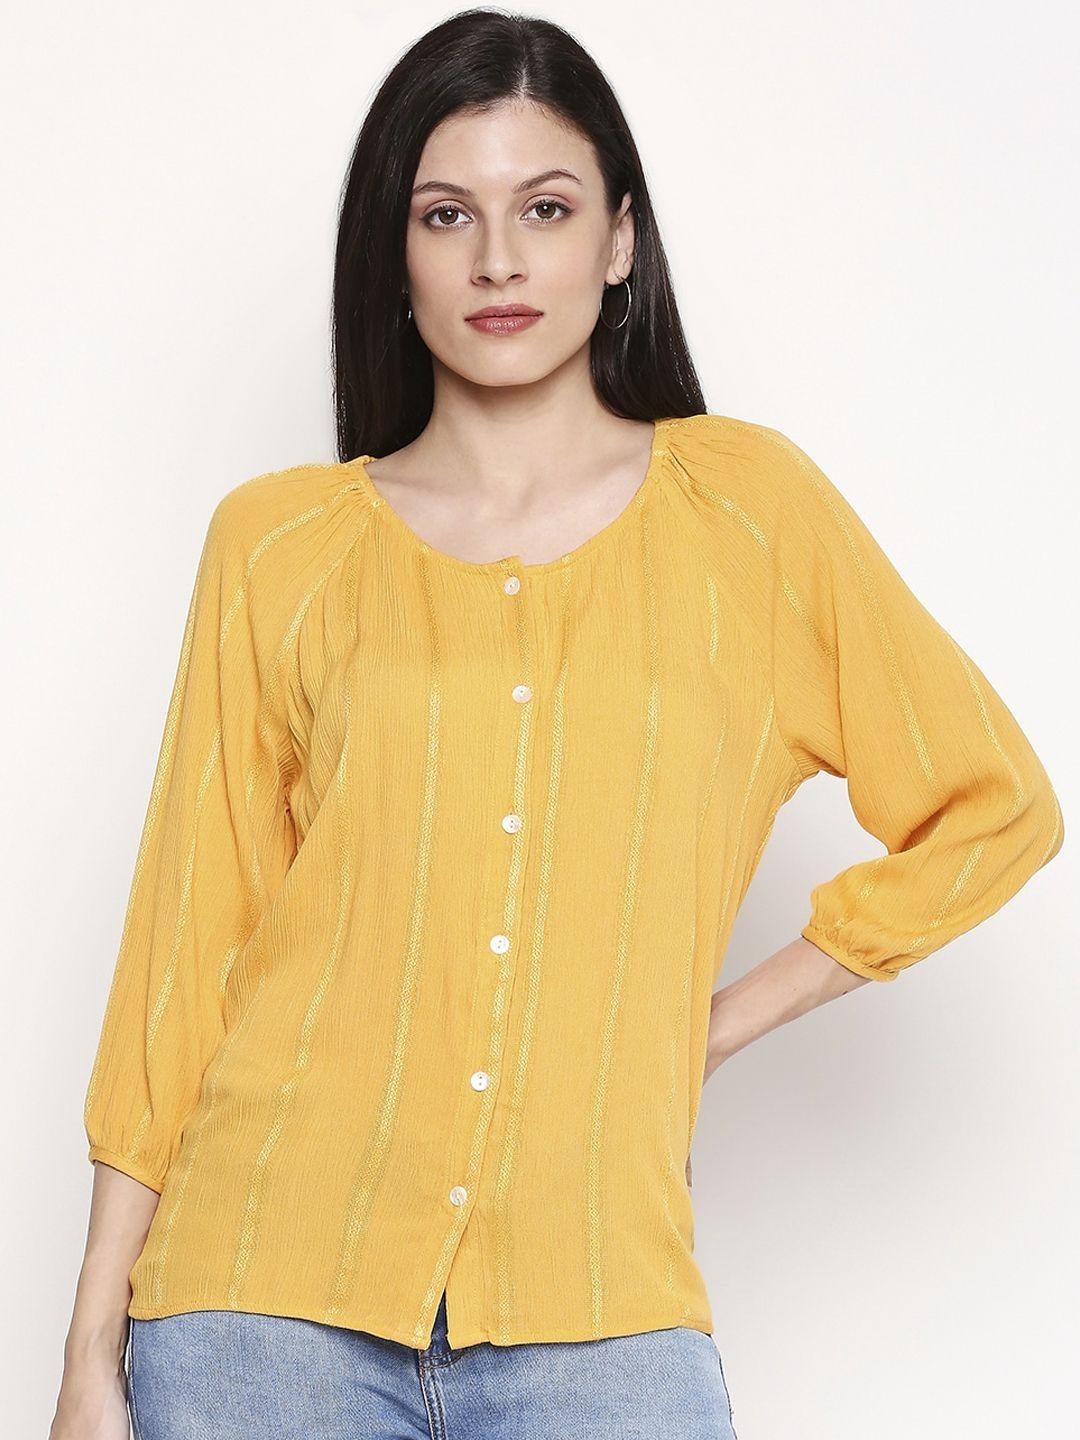 honey by pantaloons women yellow solid top